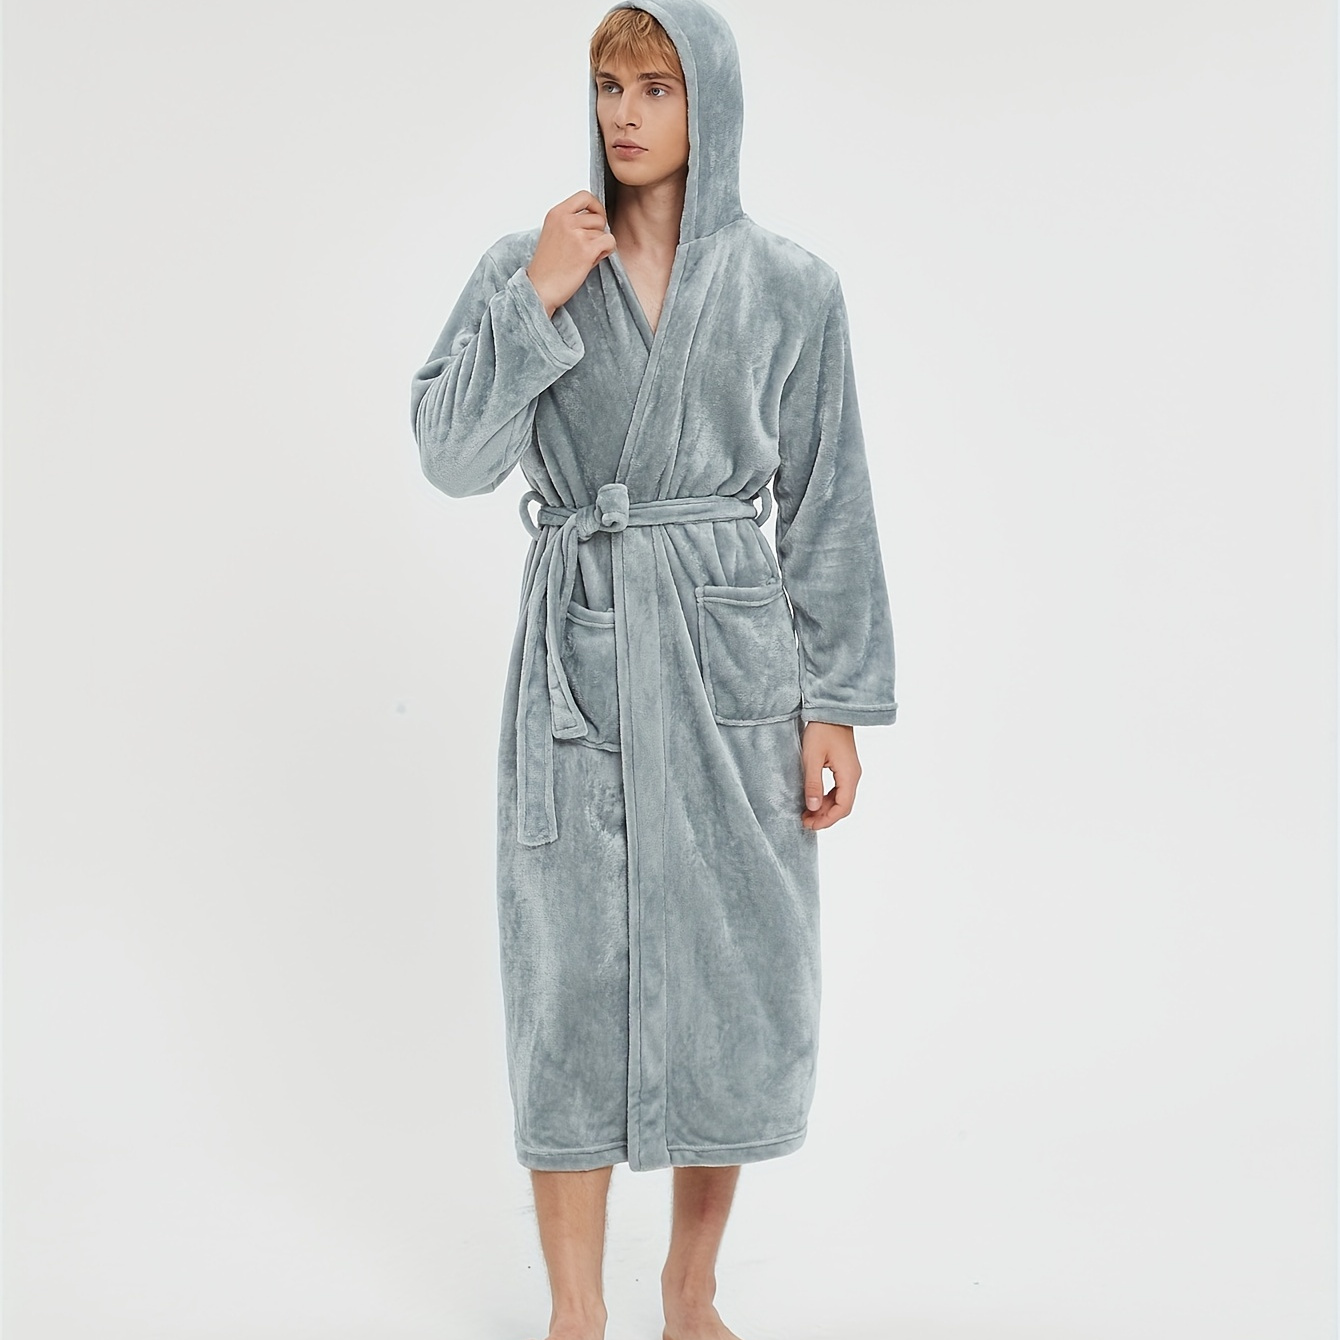 

Men's Comfy Solid Fleece Robe Home Hooded Pajamas Wear With Pocket & Hair Dry Hat, One-piece Kimono Night-robe After Bath